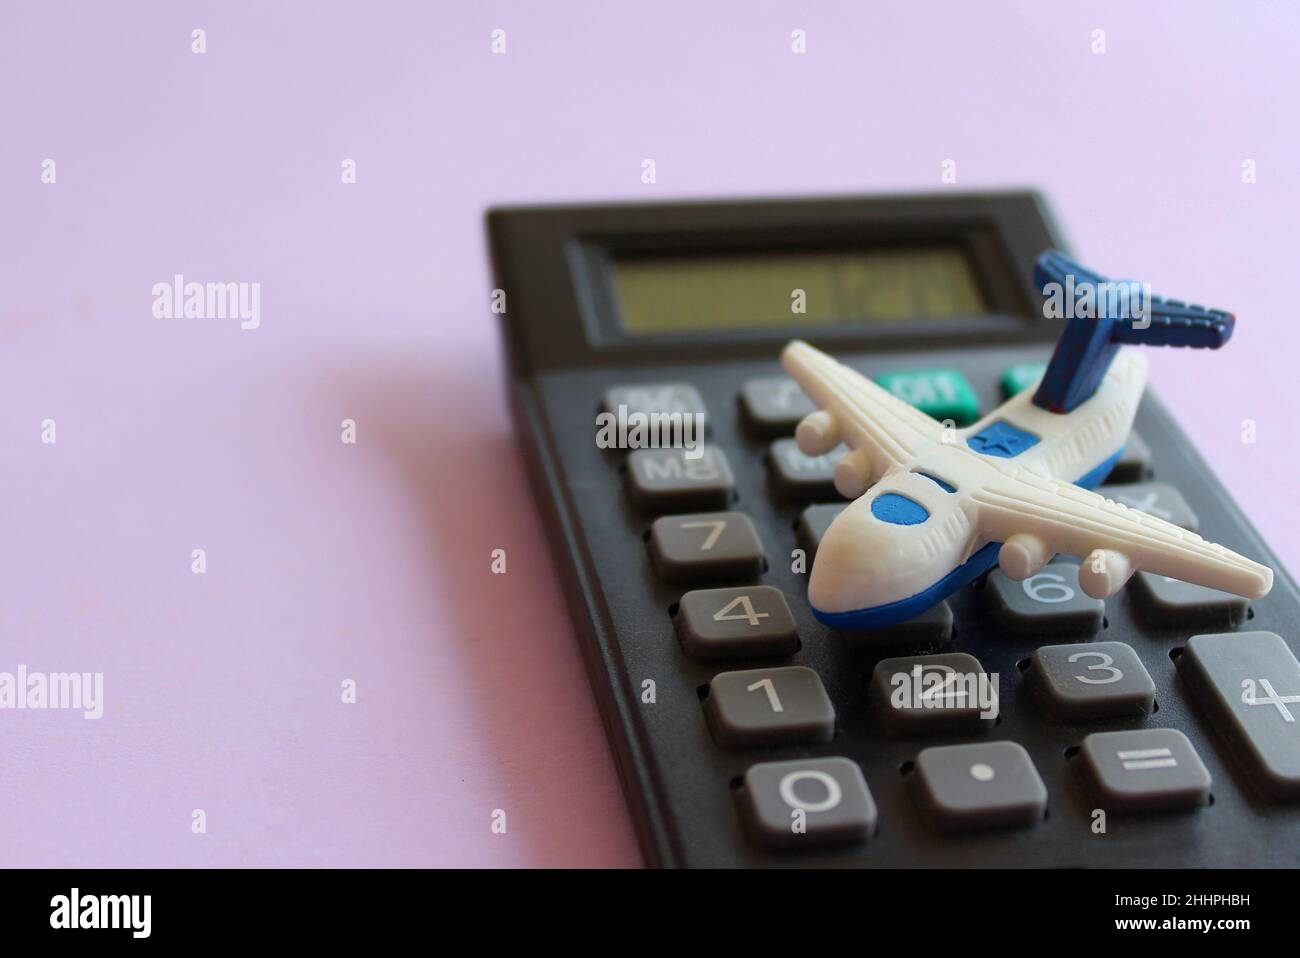 Selective focus image of toy plane and calculator on purple background. Travel cost calculation concept. Stock Photo